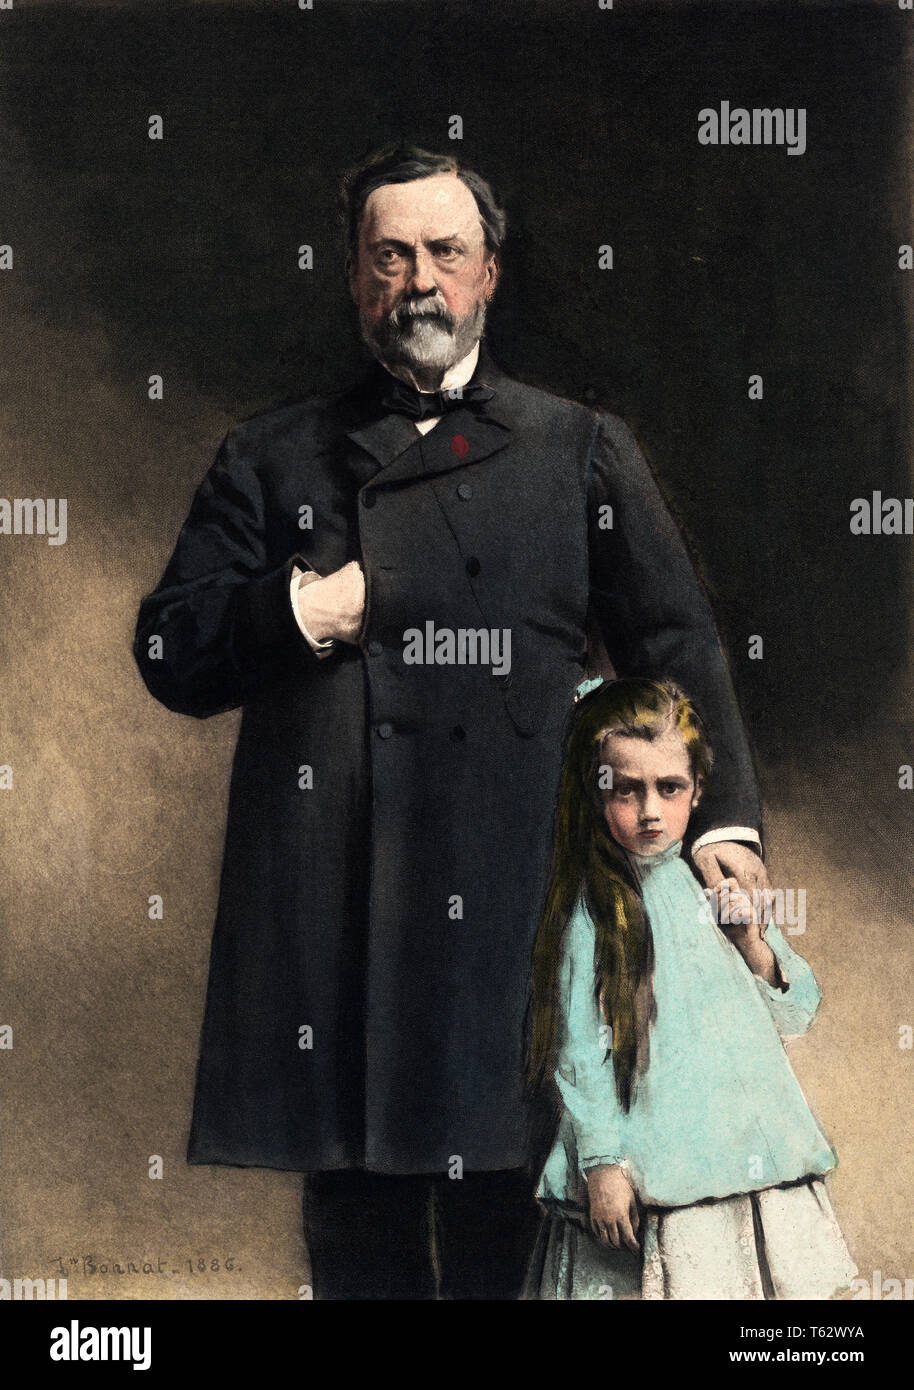 1800s 1880s PORTRAIT OF LOUIS PASTEUR CHEMIST SCIENTIST WITH GRANDDAUGHTER PAINTING BY BONNAT COLOR HALFTONE - kh13290 CPC001 HARS GRANDPARENT HOME LIFE COPY SPACE HALF-LENGTH DAUGHTERS PERSONS CARING MALES FATHERS MIDDLE-AGED 1800s MIDDLE-AGED MAN EYE CONTACT PROTECTION LOUIS CHEMIST DADS CONNECTION GRANDDAUGHTER 1880s STYLISH JUVENILES TOGETHERNESS CAUCASIAN ETHNICITY OLD FASHIONED Stock Photo